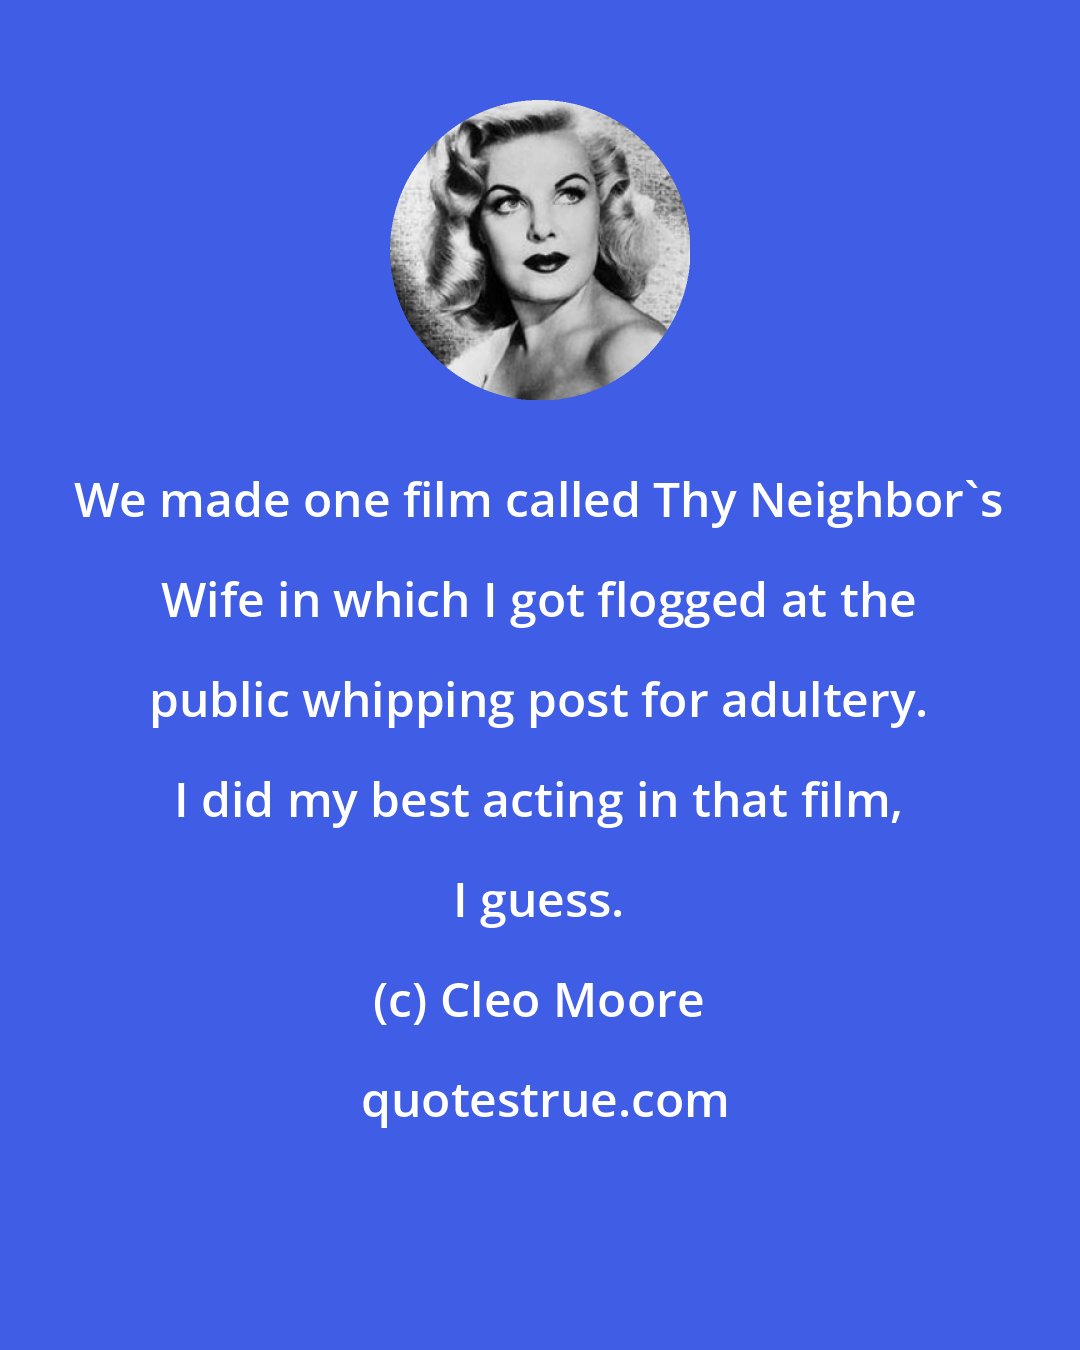 Cleo Moore: We made one film called Thy Neighbor's Wife in which I got flogged at the public whipping post for adultery. I did my best acting in that film, I guess.